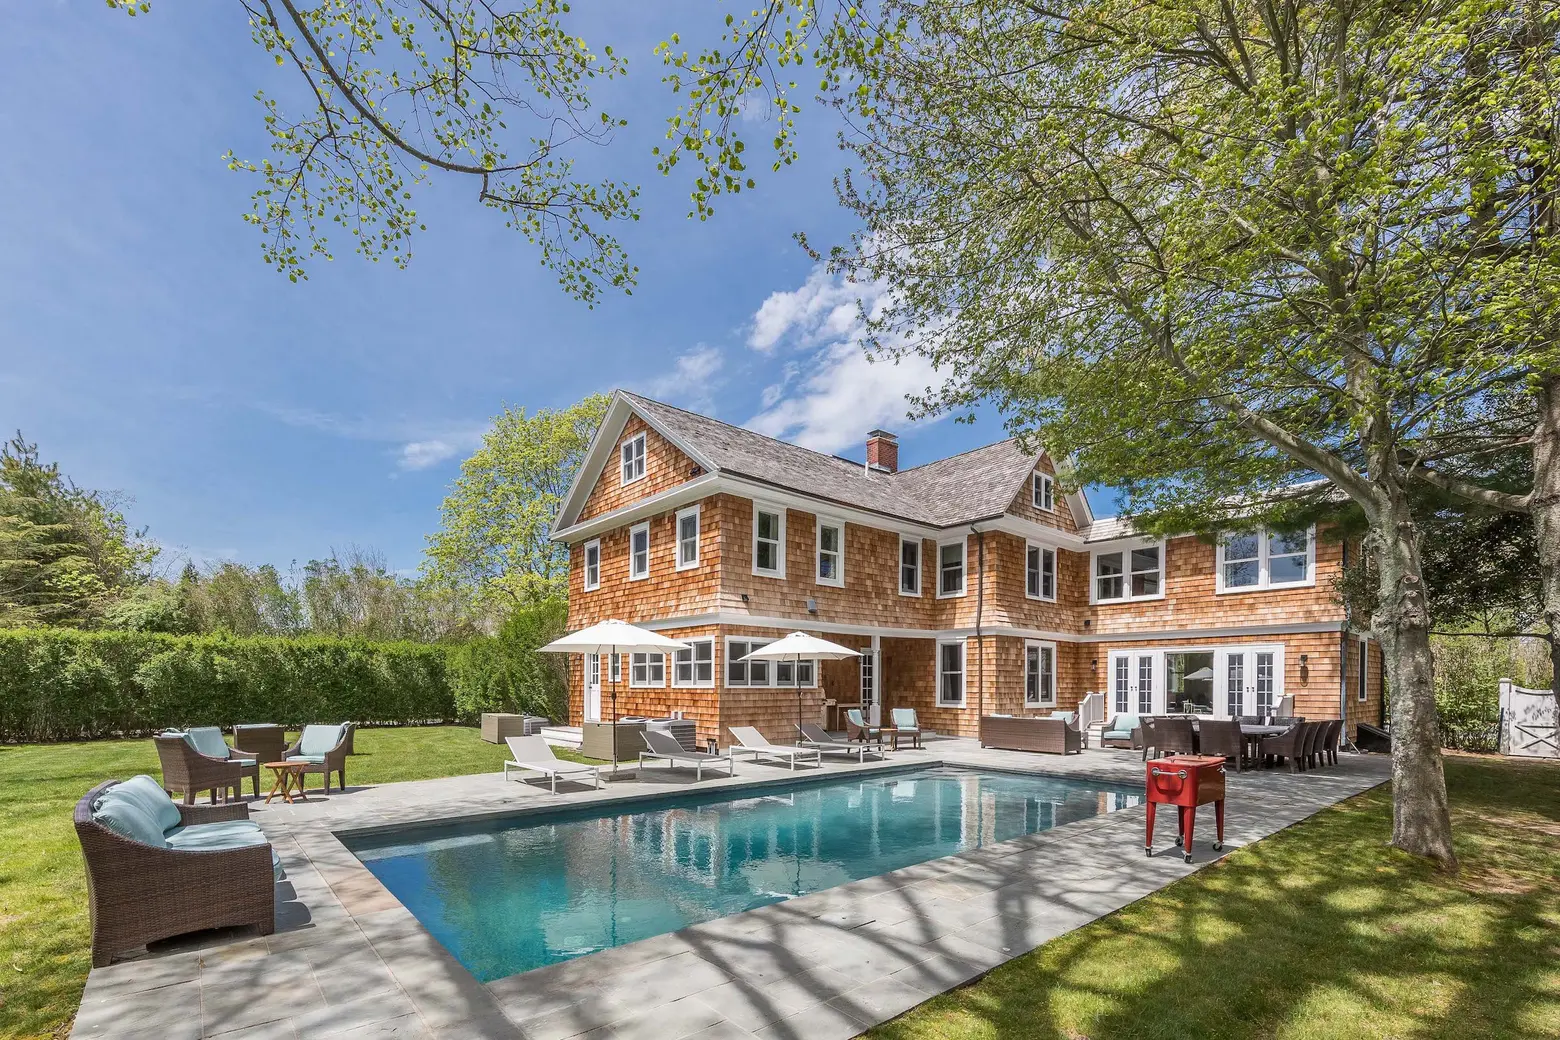 Bethenny Frankel sells Hamptons home after taking a loss on her Soho condo